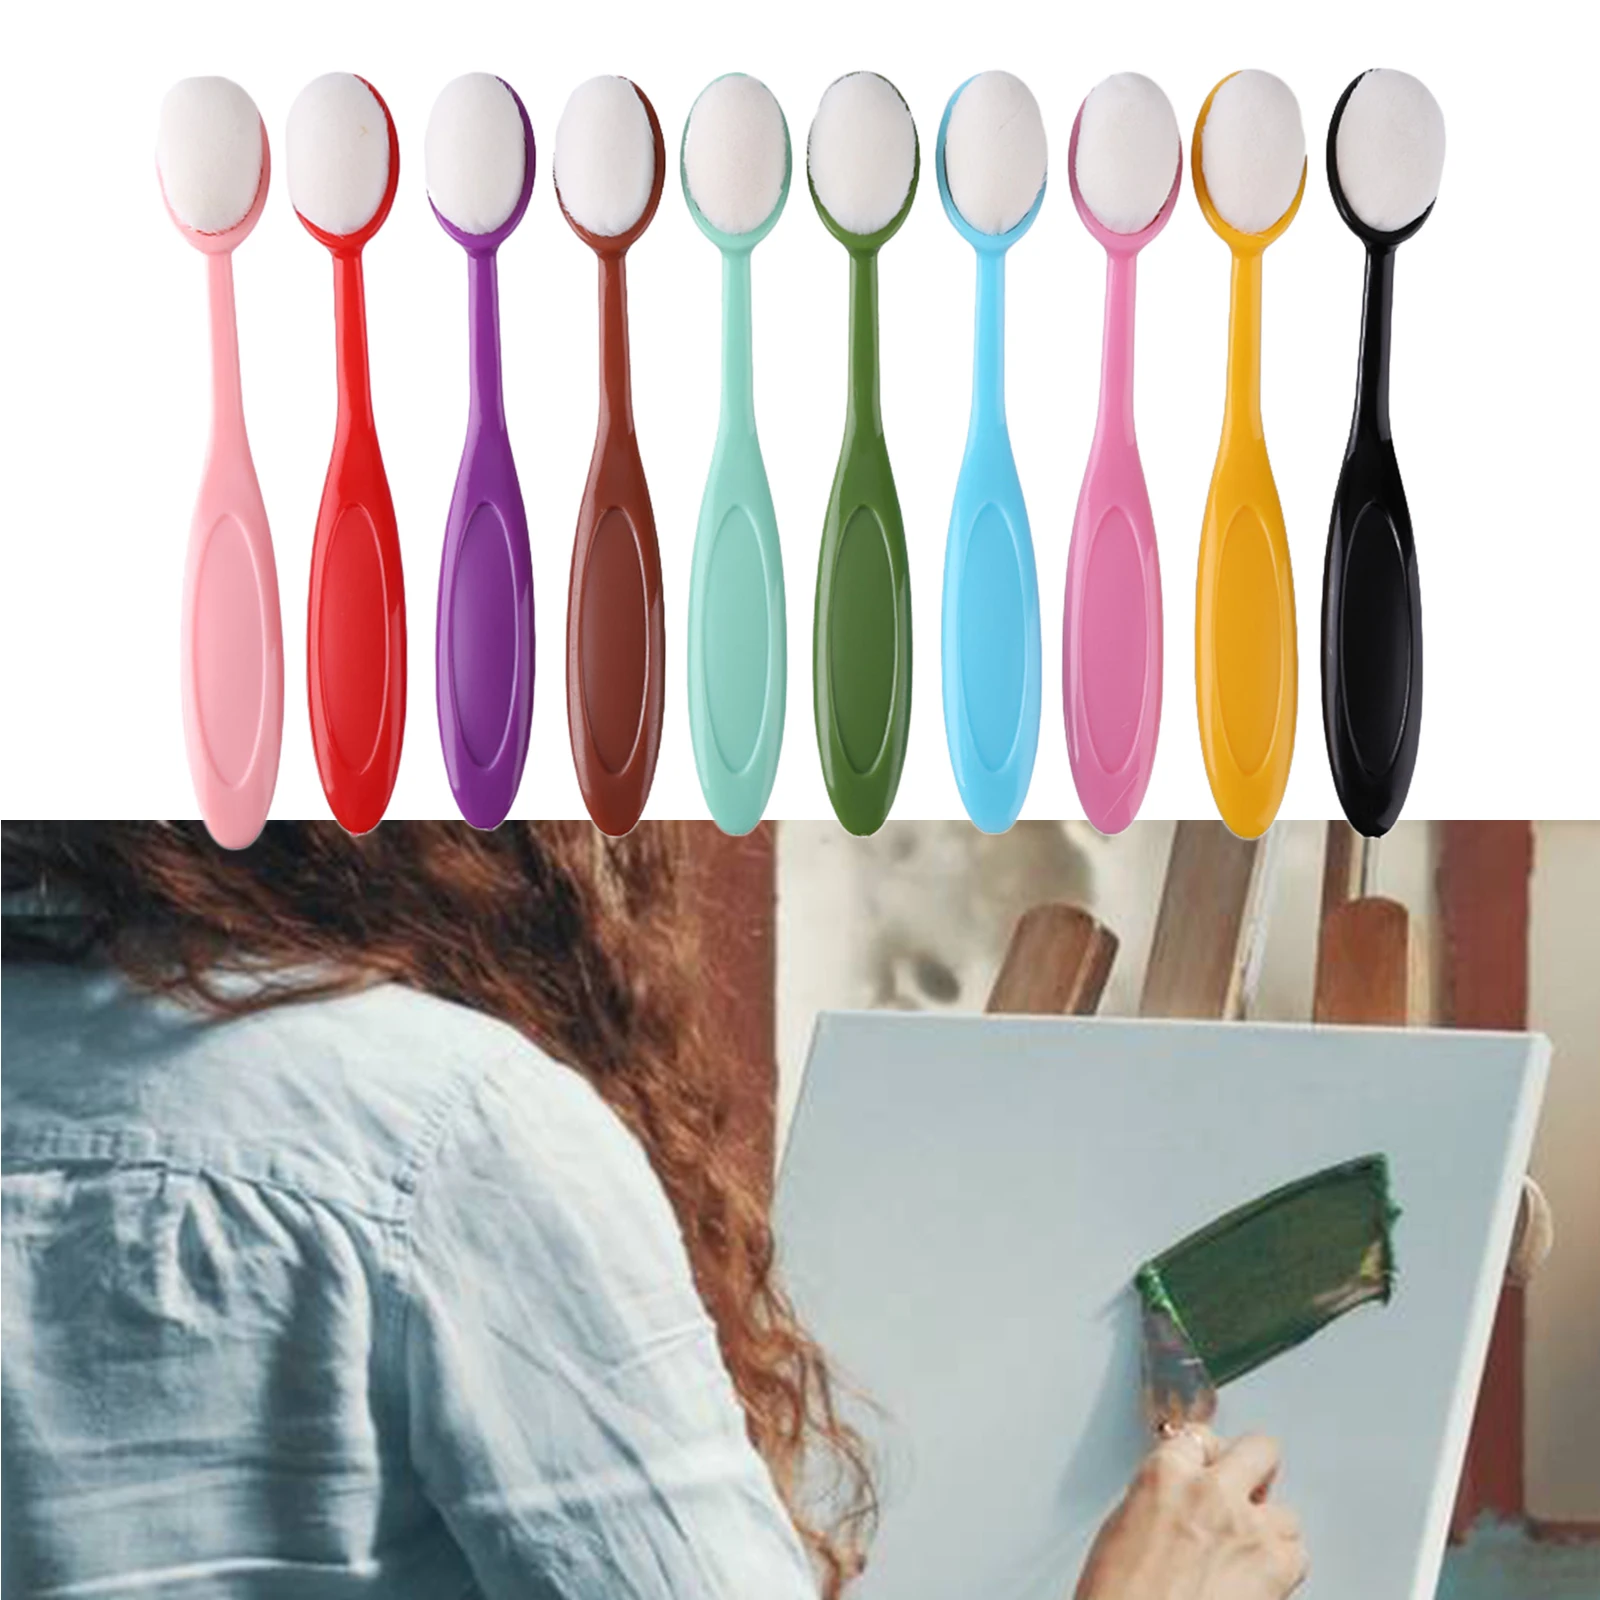 10 Pack Craft Ink Blending Brushes Ink Blending Brushes with Color Handles Colorful Makeup Tools Drawing Brushes for Paper Craft